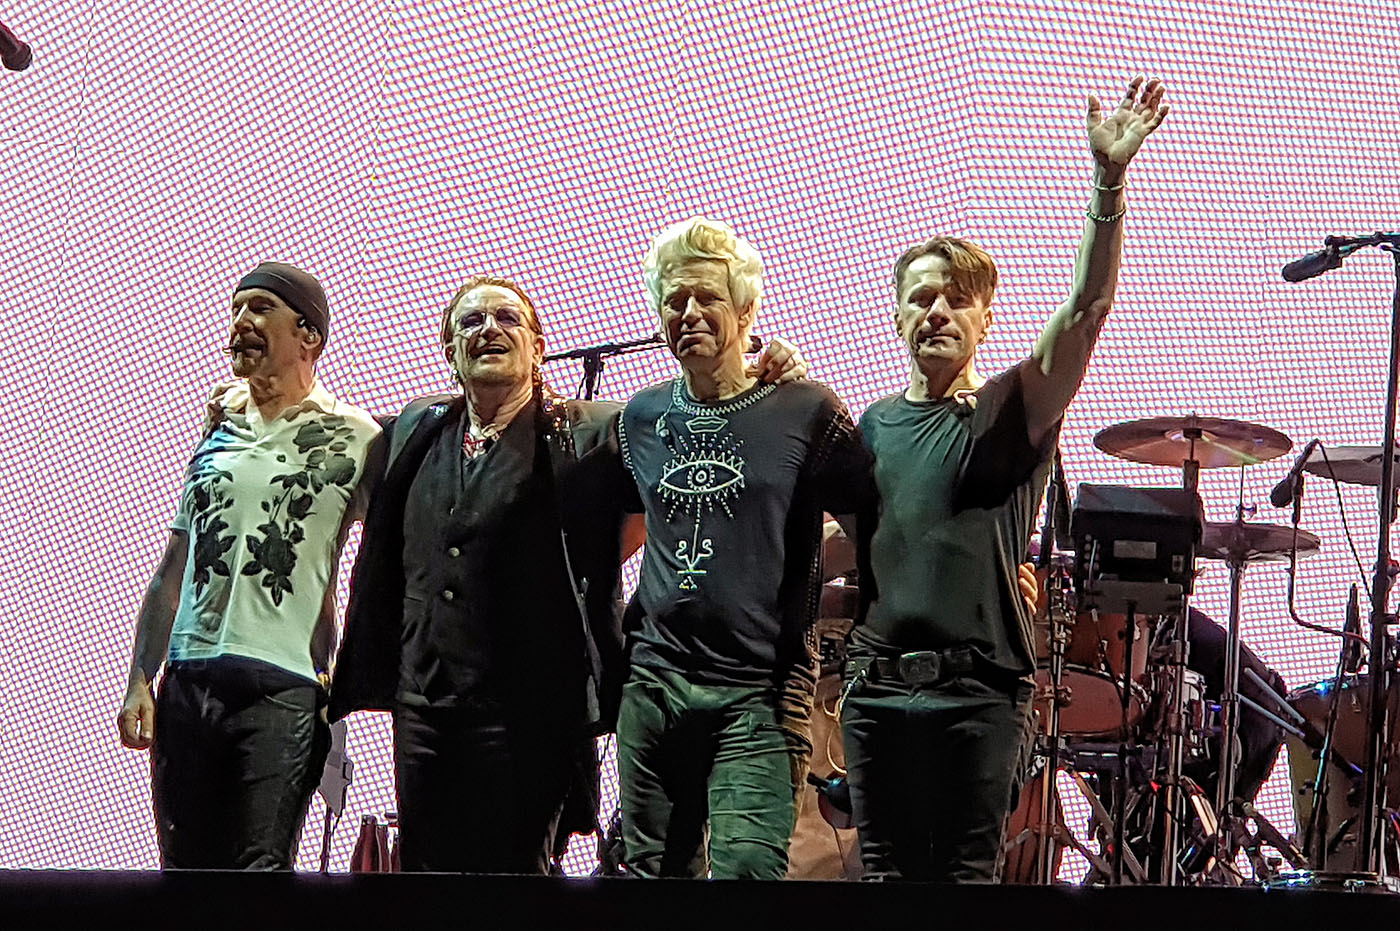 PHILIPPINE-BOUND. The Irish rockers wave to the crowd at their Singapore show. They are set to make their Philippine debut at the Philippine Arena on December 11. Photo by Rupert Ambil/Rappler 